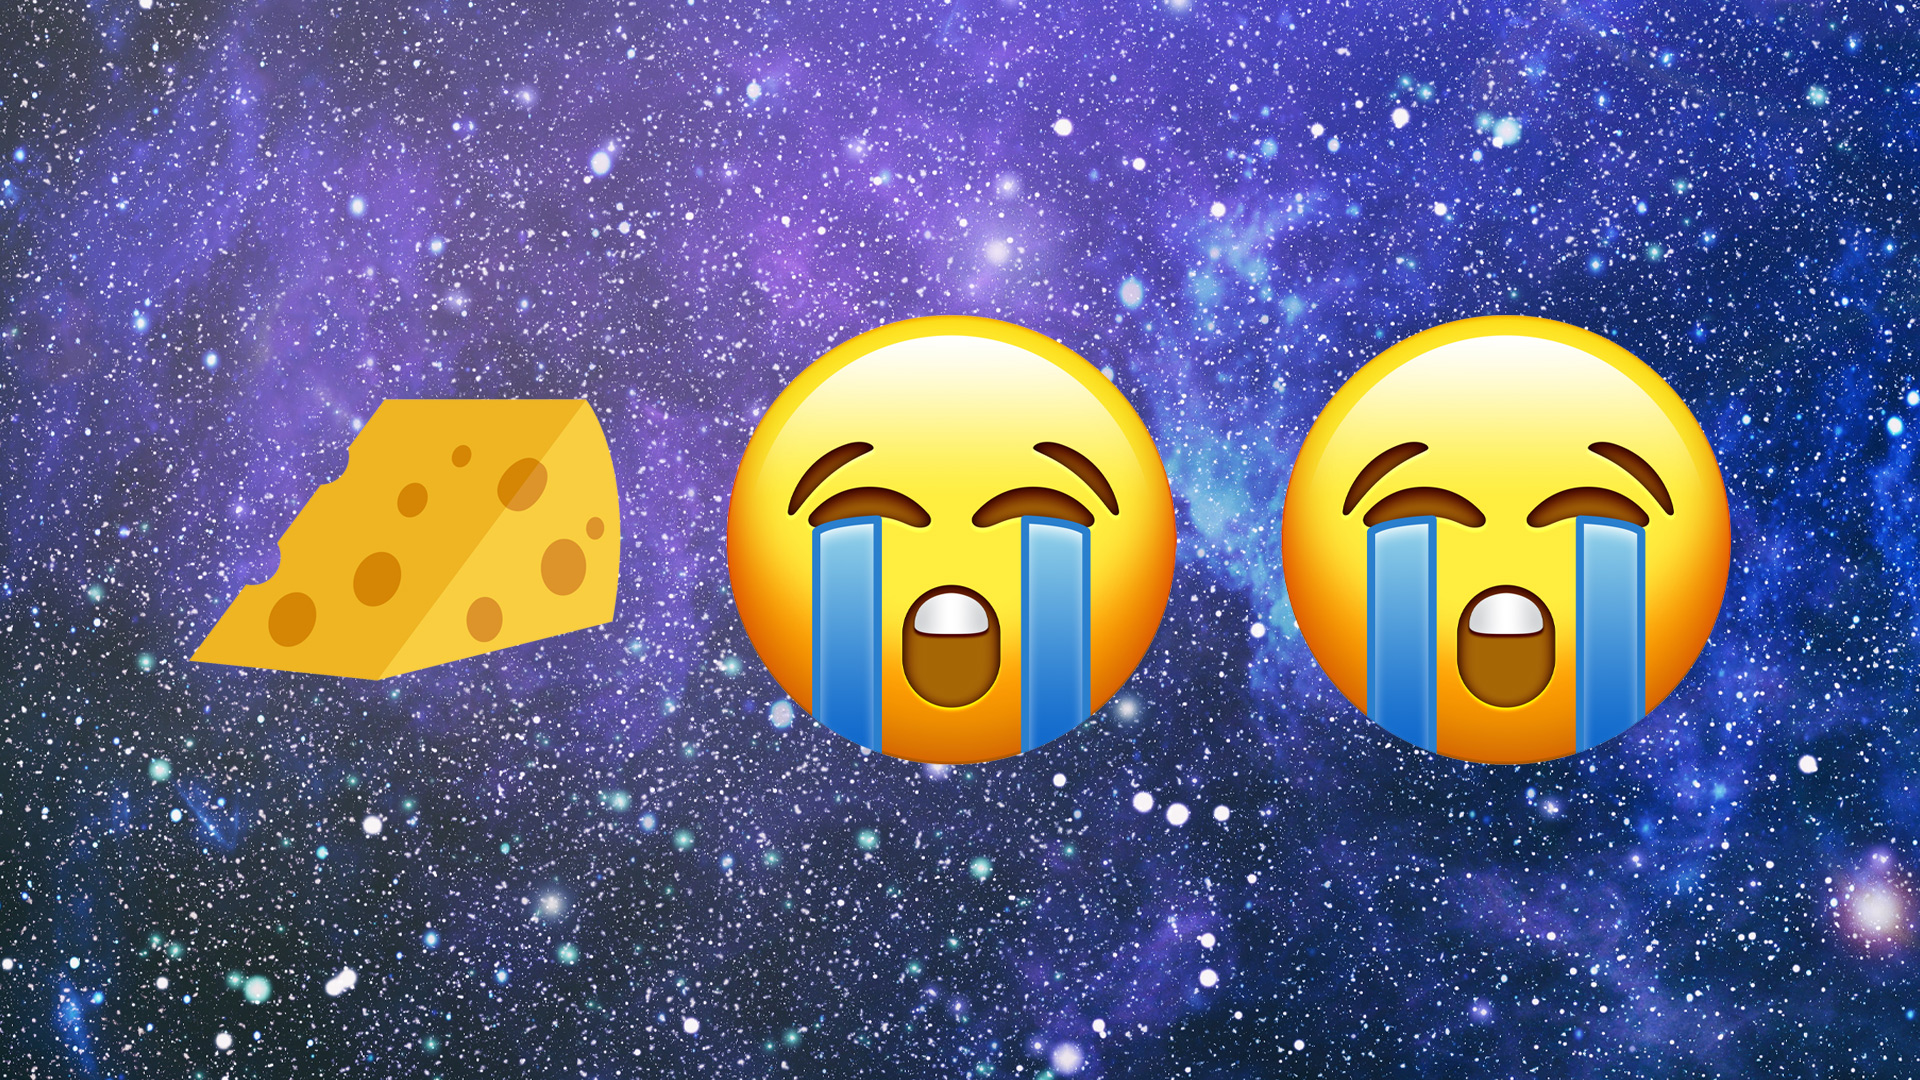 Cheese, two crying emojis